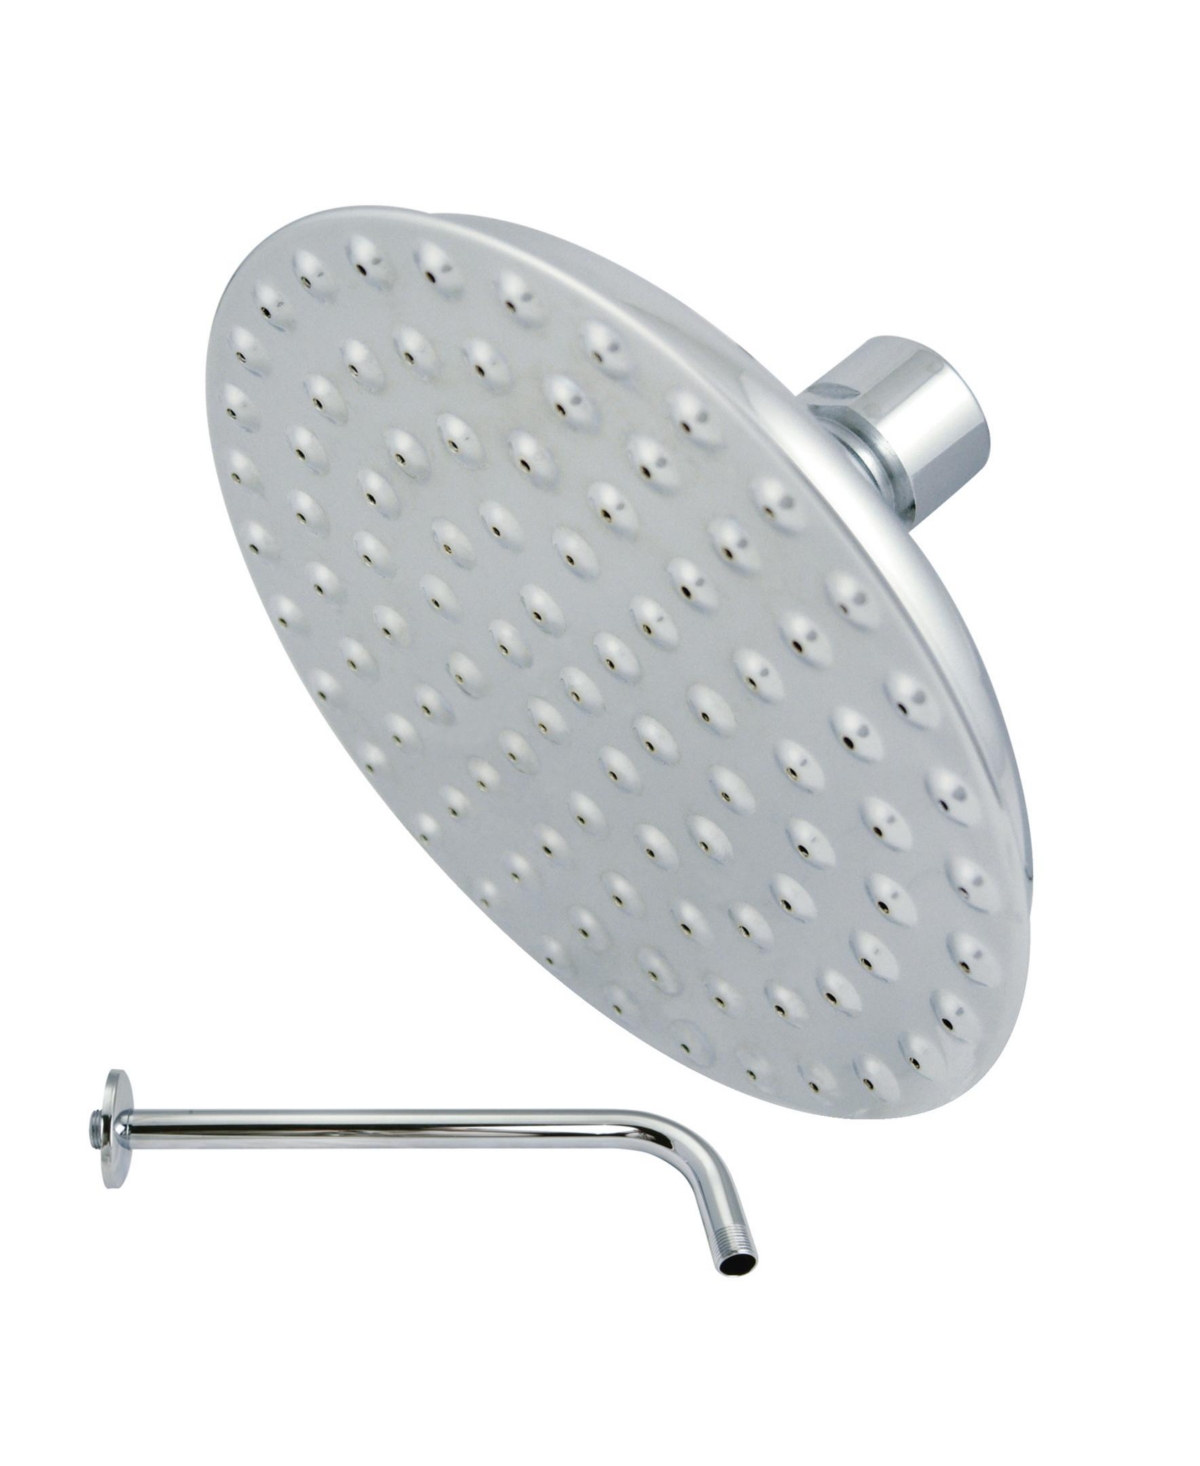 Kingston Brass Victorian Showerhead With Shower Arm in Polished Chrome Bedding